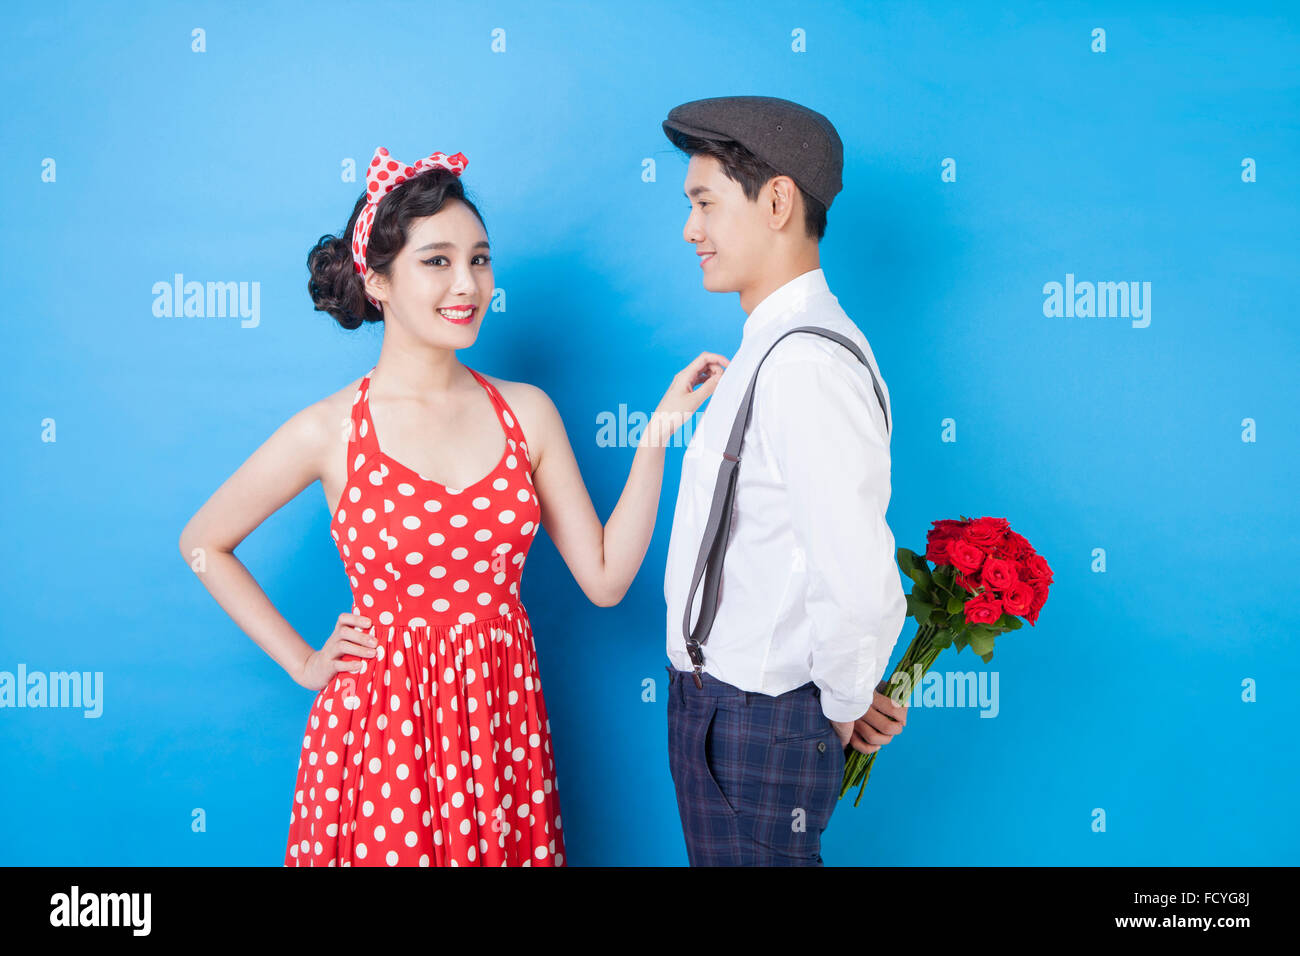 Couple in retro style fashion and man holding roses behind his back and looking at the woman with a smile Stock Photo